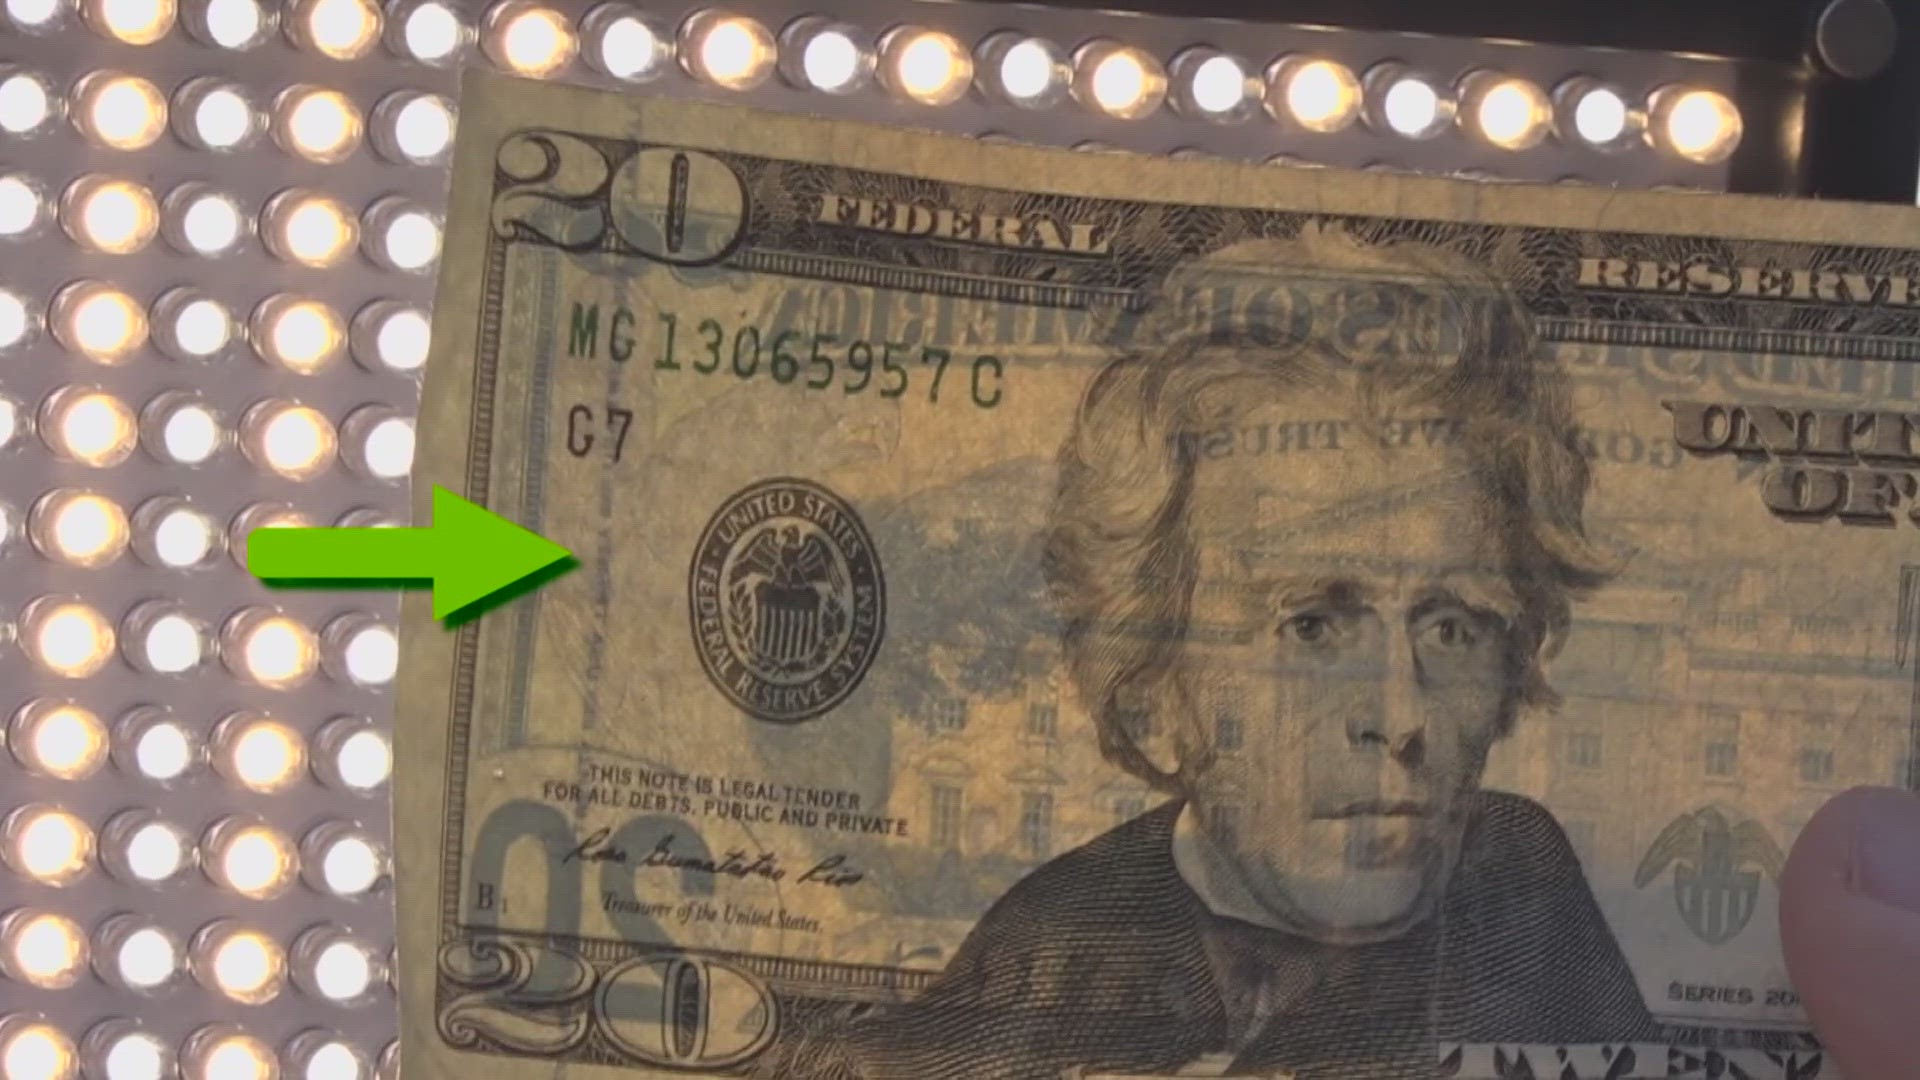 Counterfeit cash: How to know the cash in your hand is real | wfmynews2.com